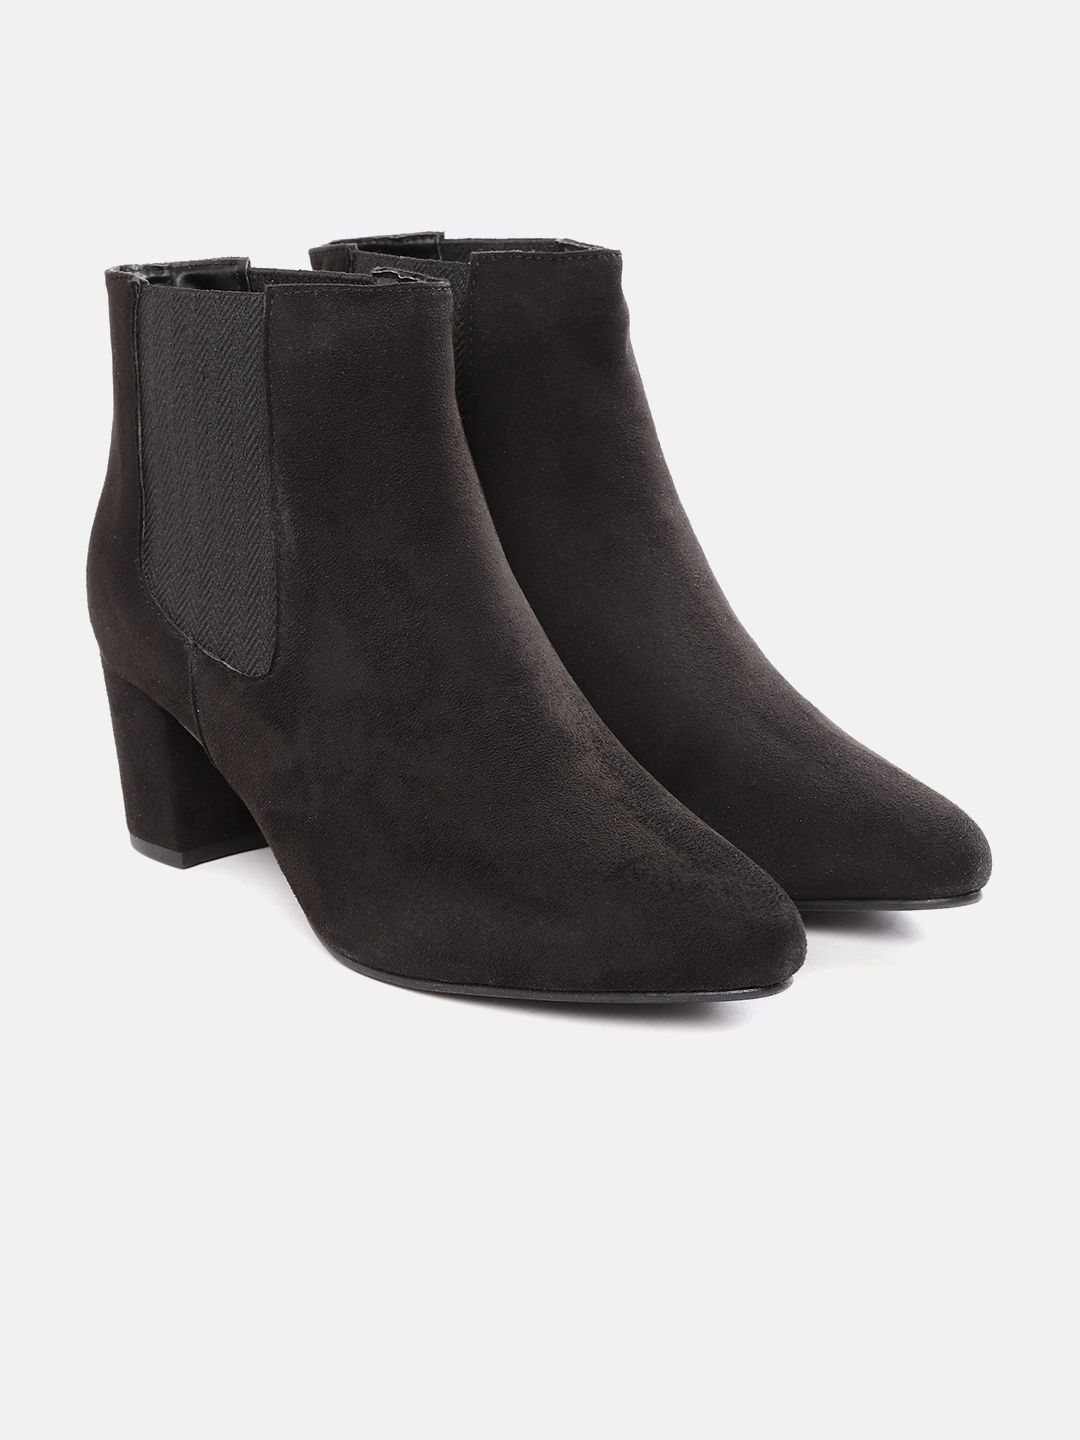 DressBerry Women Black Solid Mid-Top Block Heeled Chelsea Boots with Suede Finish Price in India